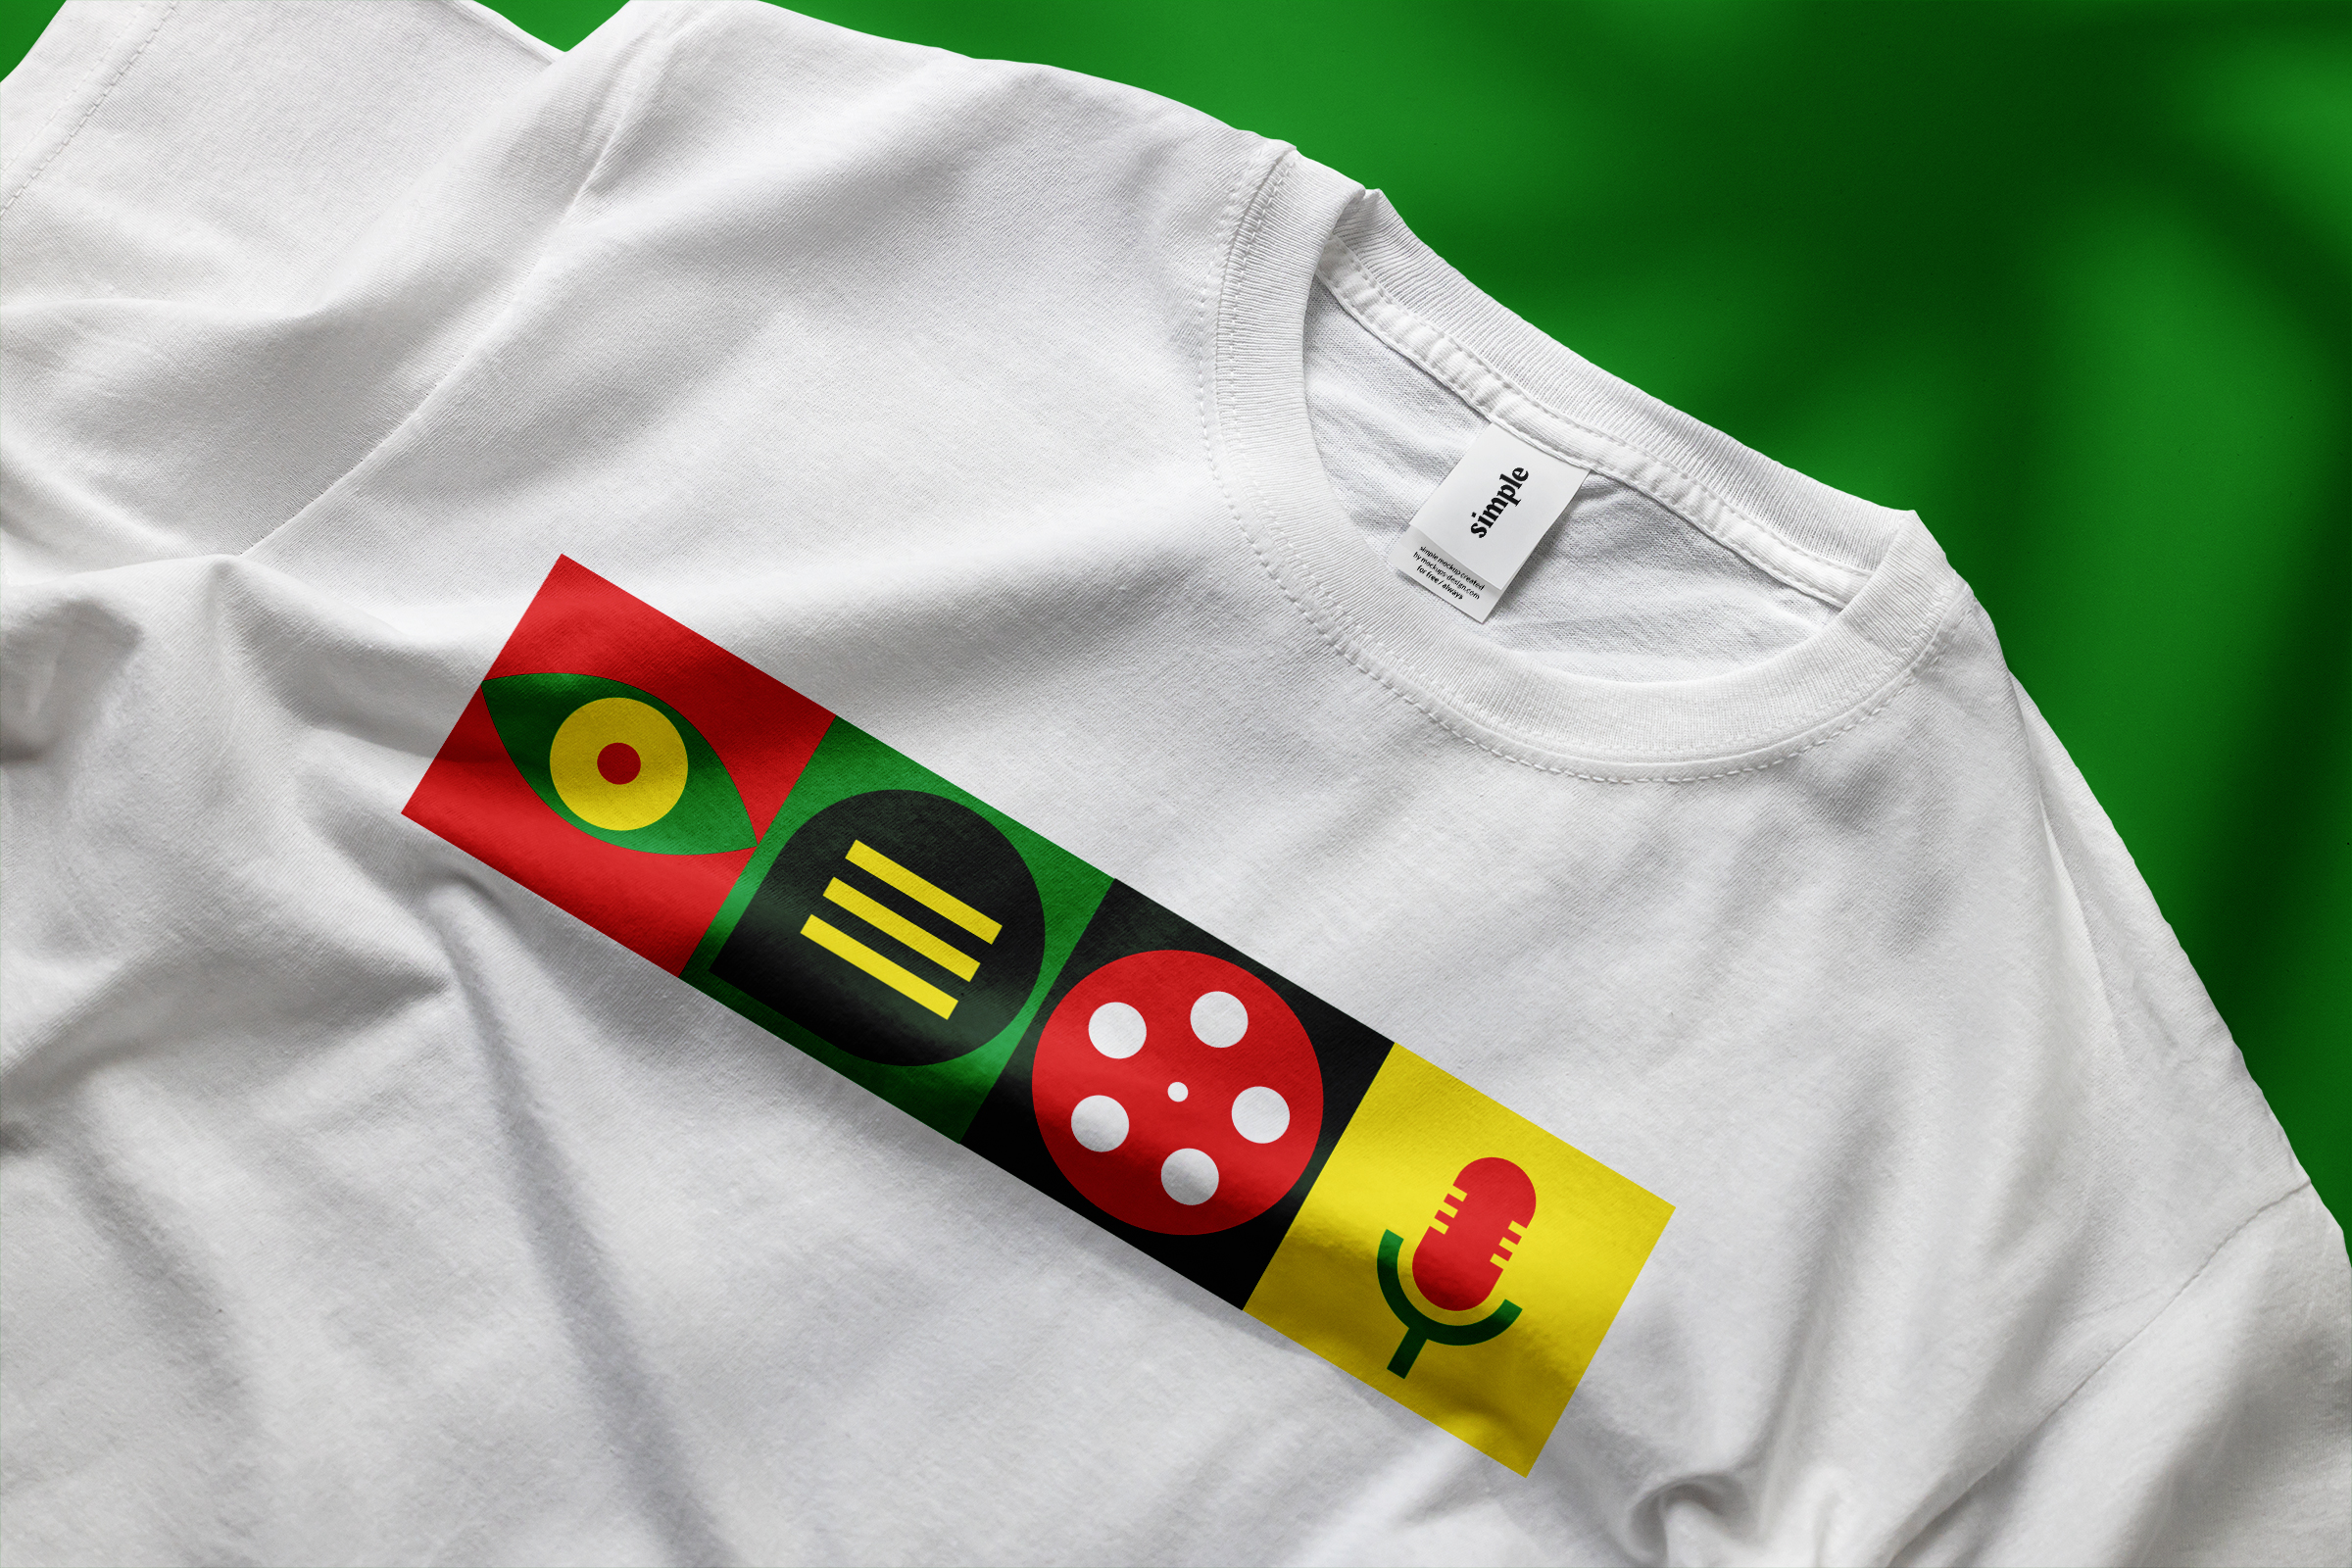 White t-shirt featuring the Ymddiried logomark of 4 blocks of icons in yellow, red, light and dark green.